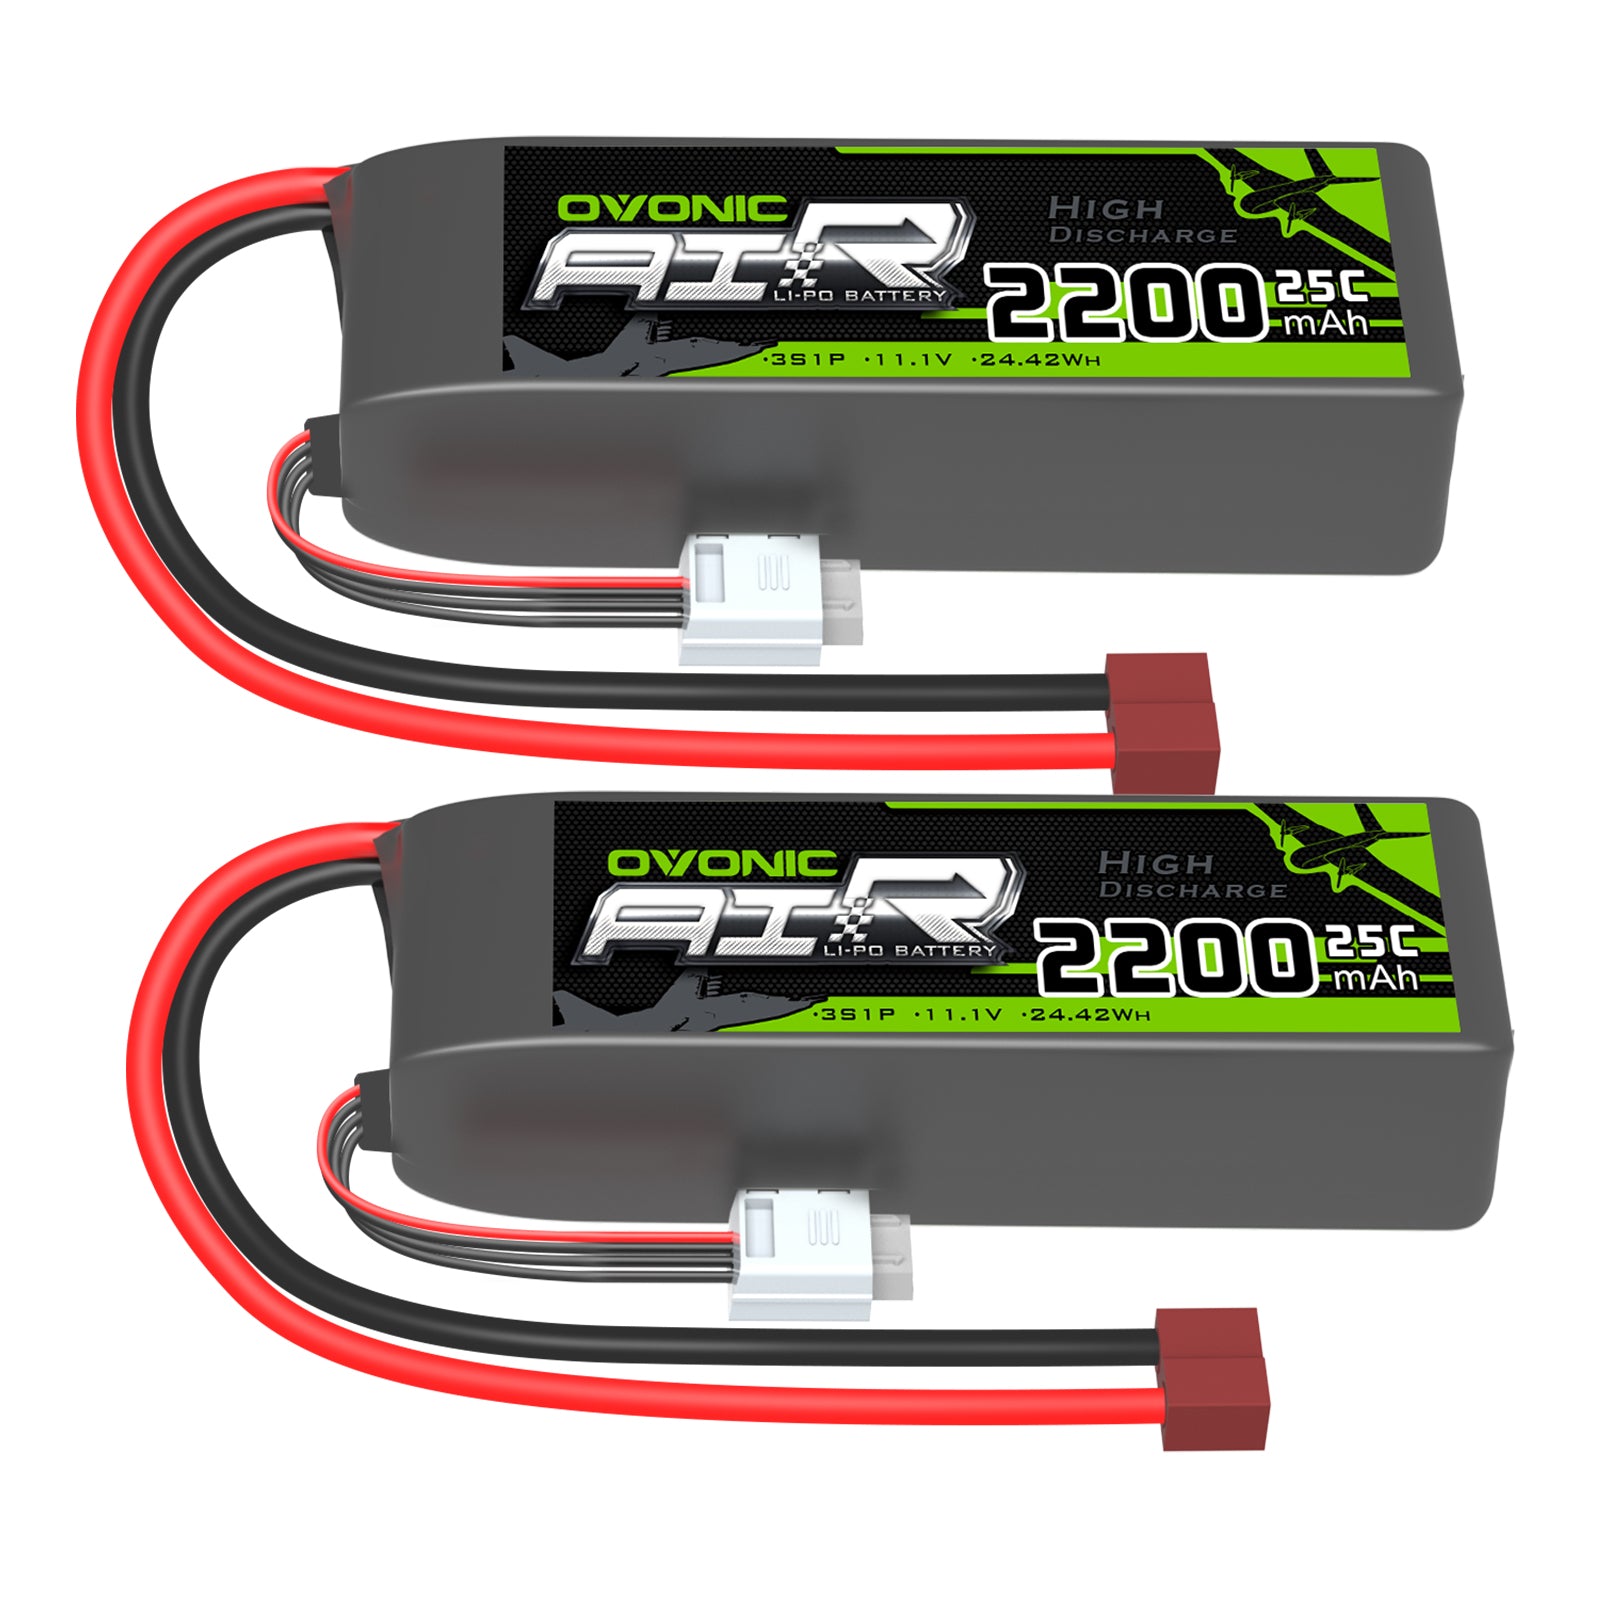 2×OVONIC 11.1V 2200mAh 3S 25C Lipo Battery with Deans for Glider, Park flyer, ft012 boat